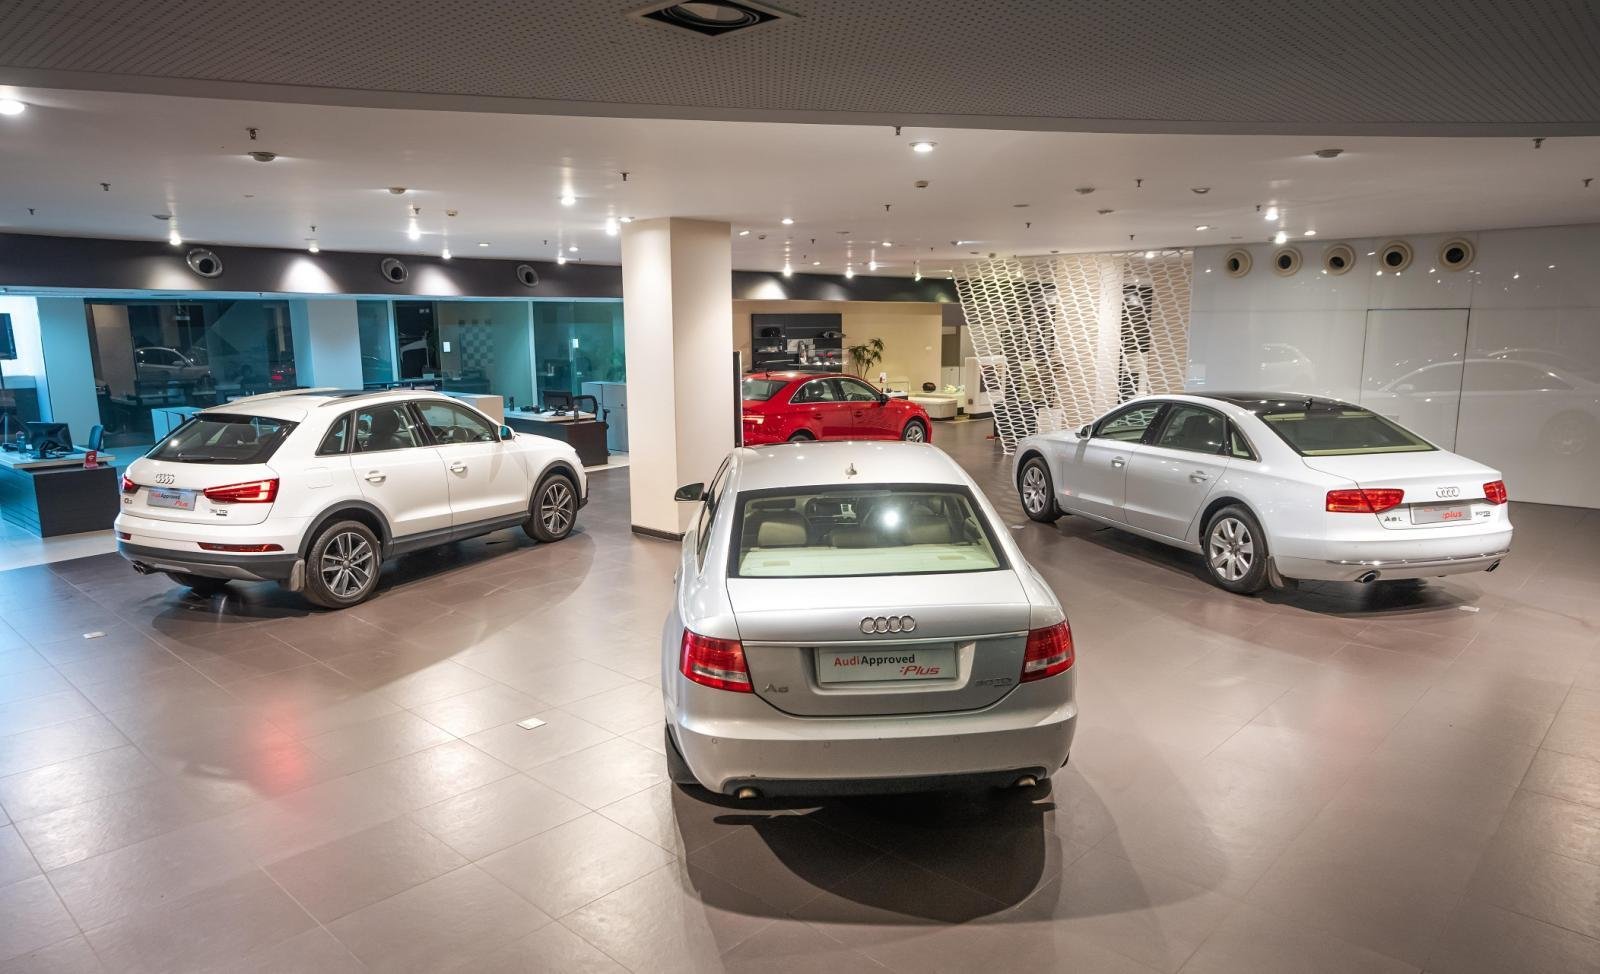 audi-approved-plus-pre-owned-luxury-car-showroom